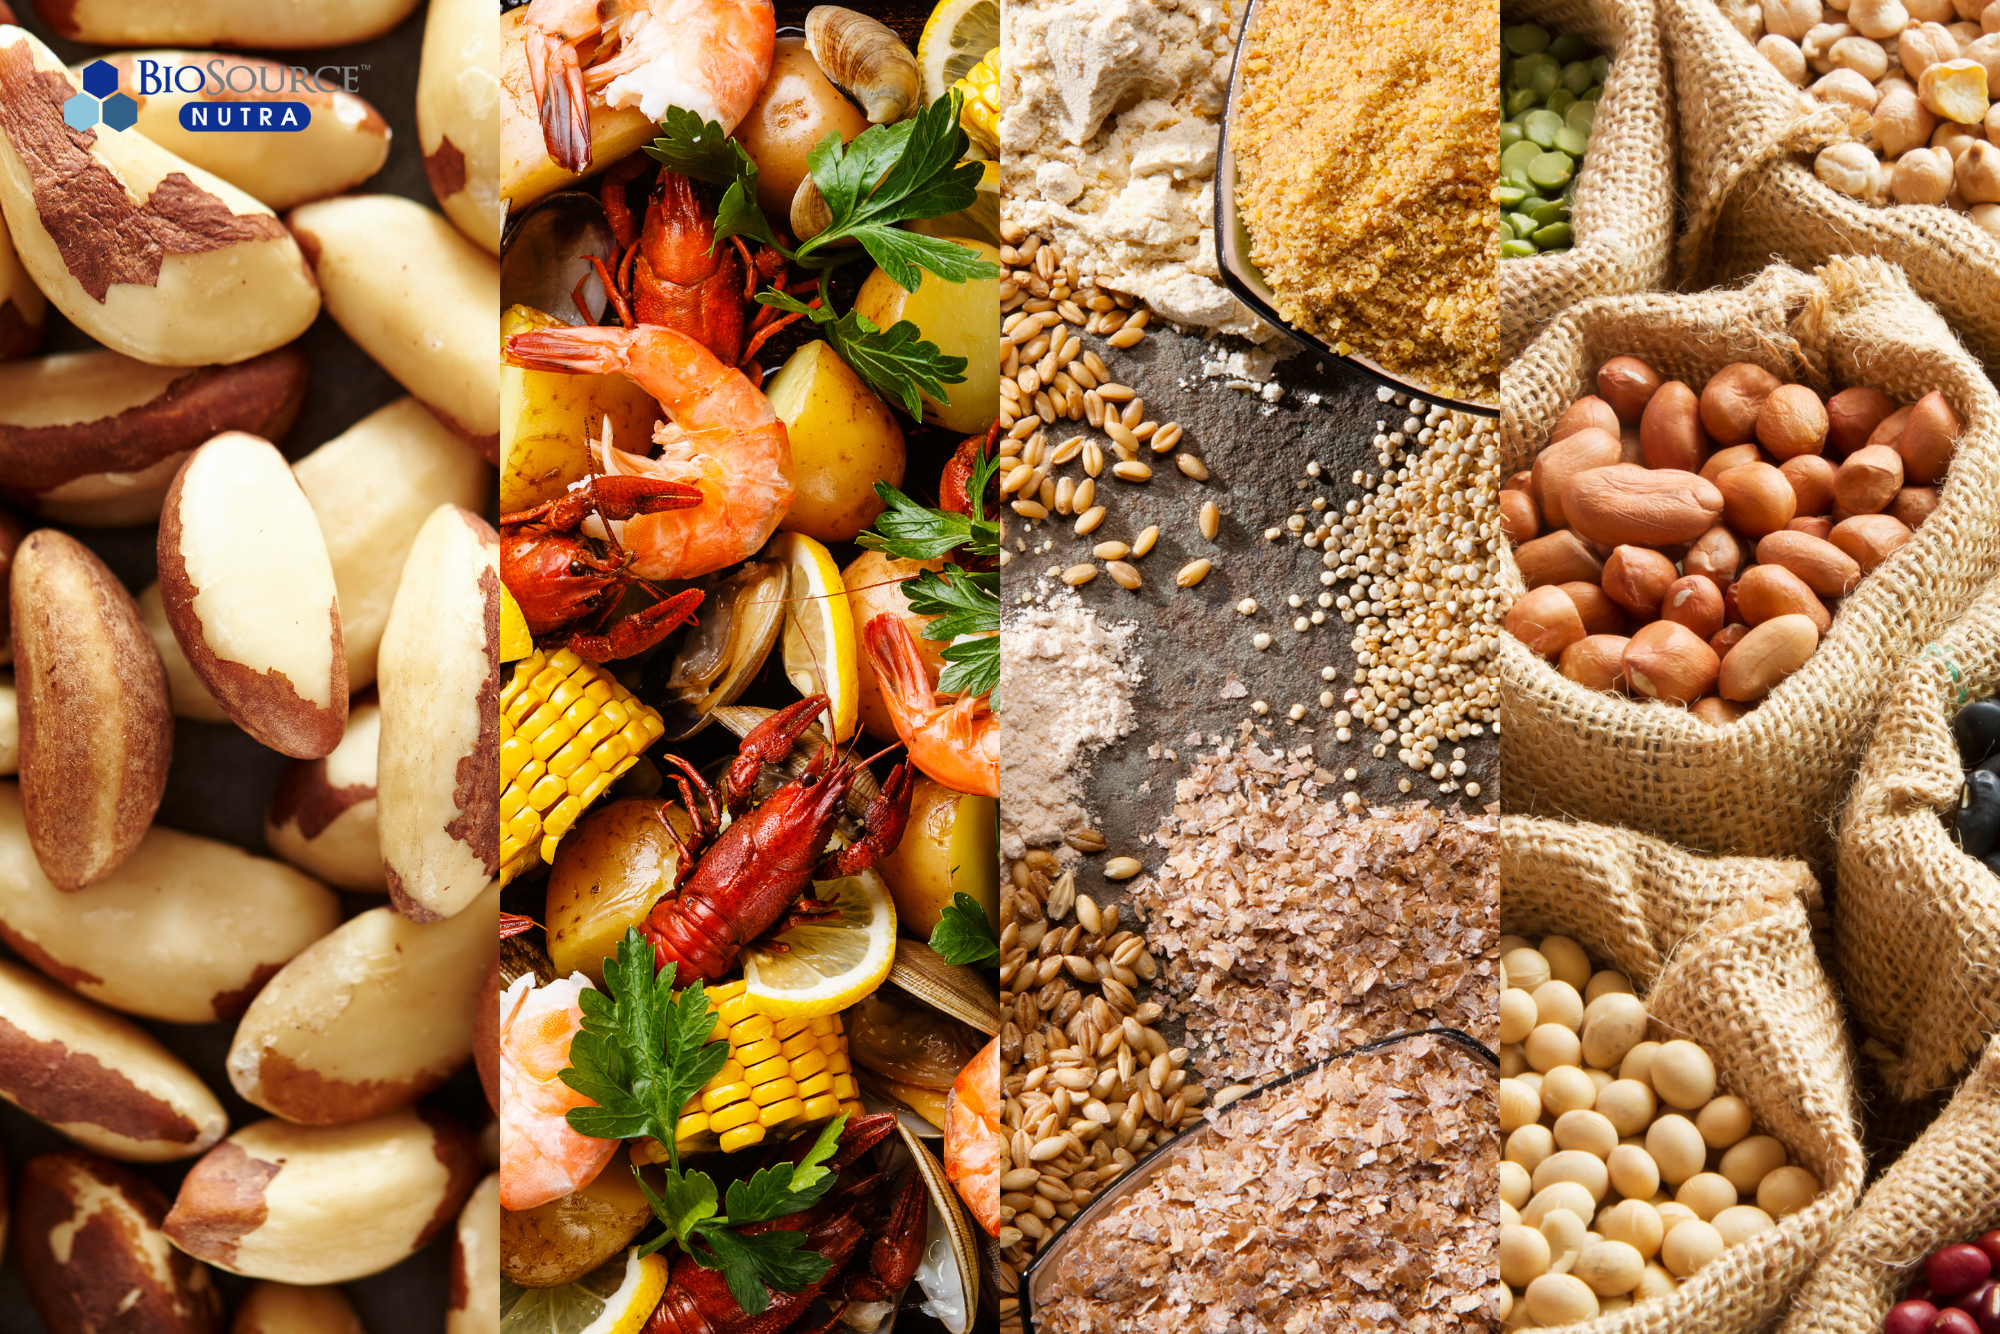 An image of nuts, seafood, and grains